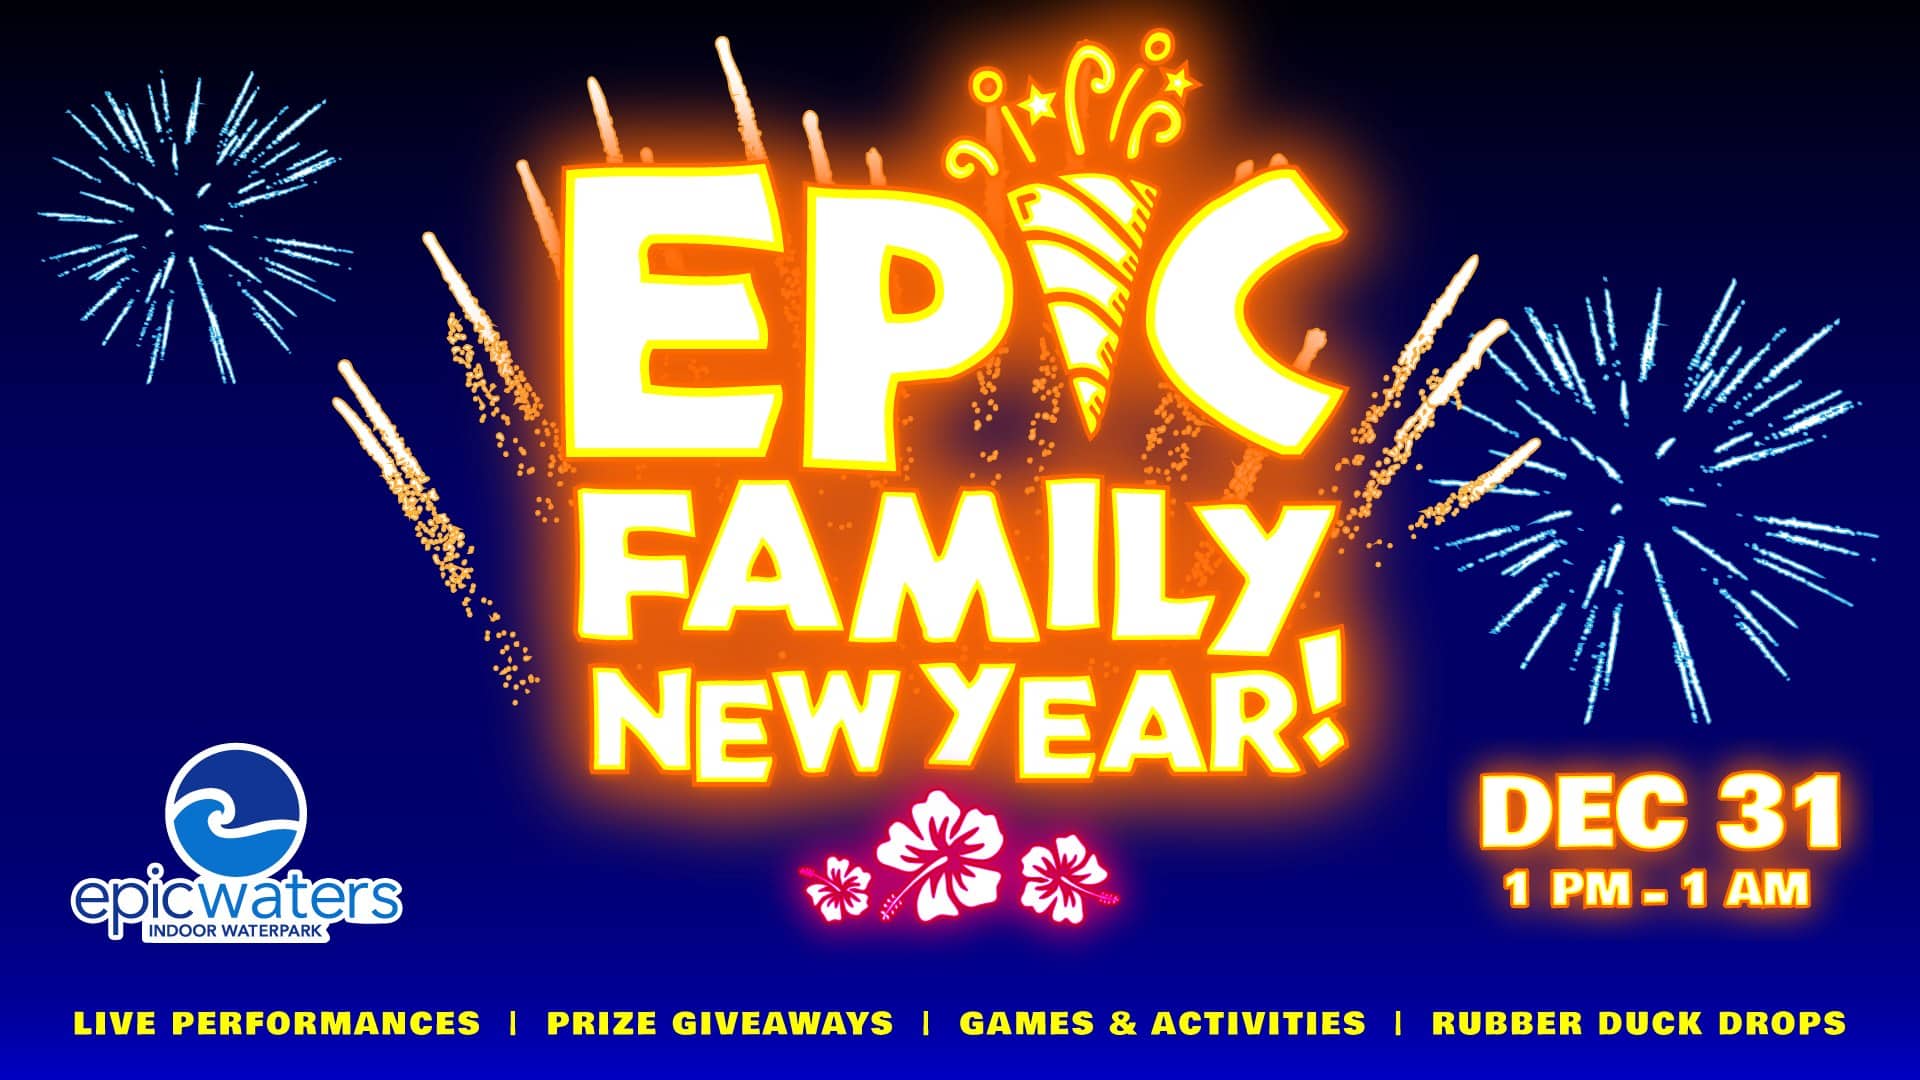 epic waters new year poster